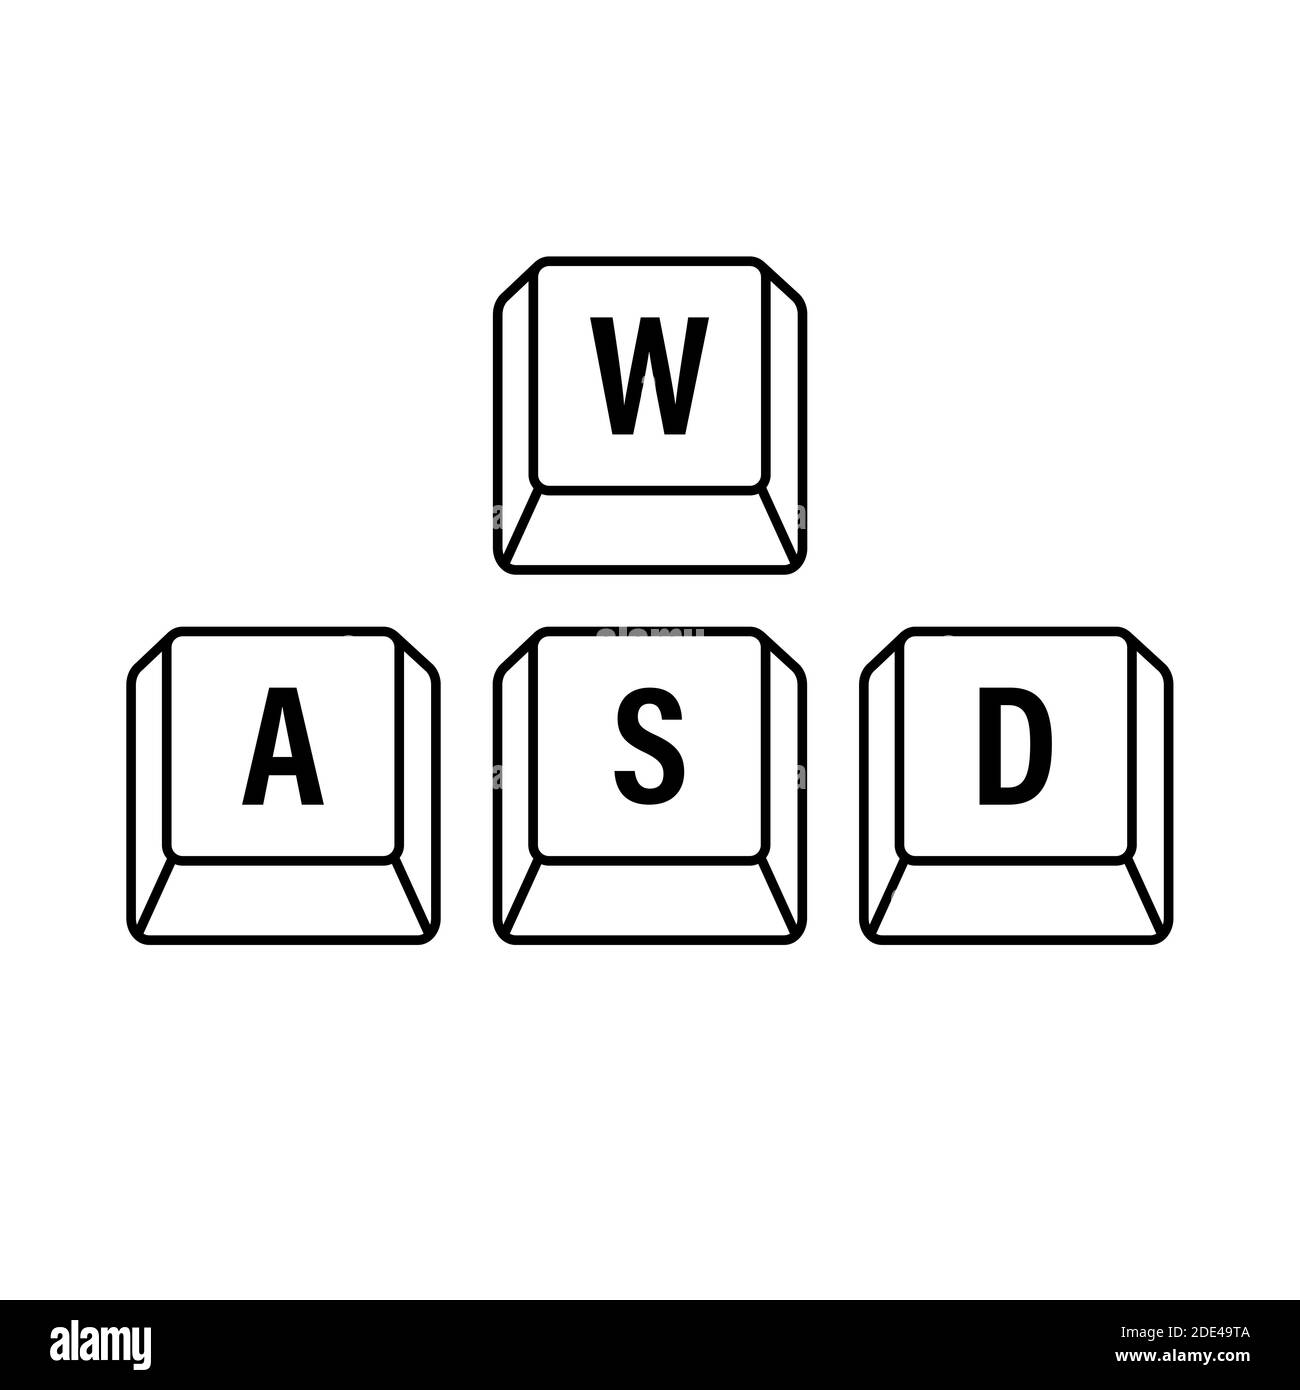 WASD computer keyboard buttons. Desktop interface. Web icon. Gaming and cybersport. Vector stock illustration. Stock Vector